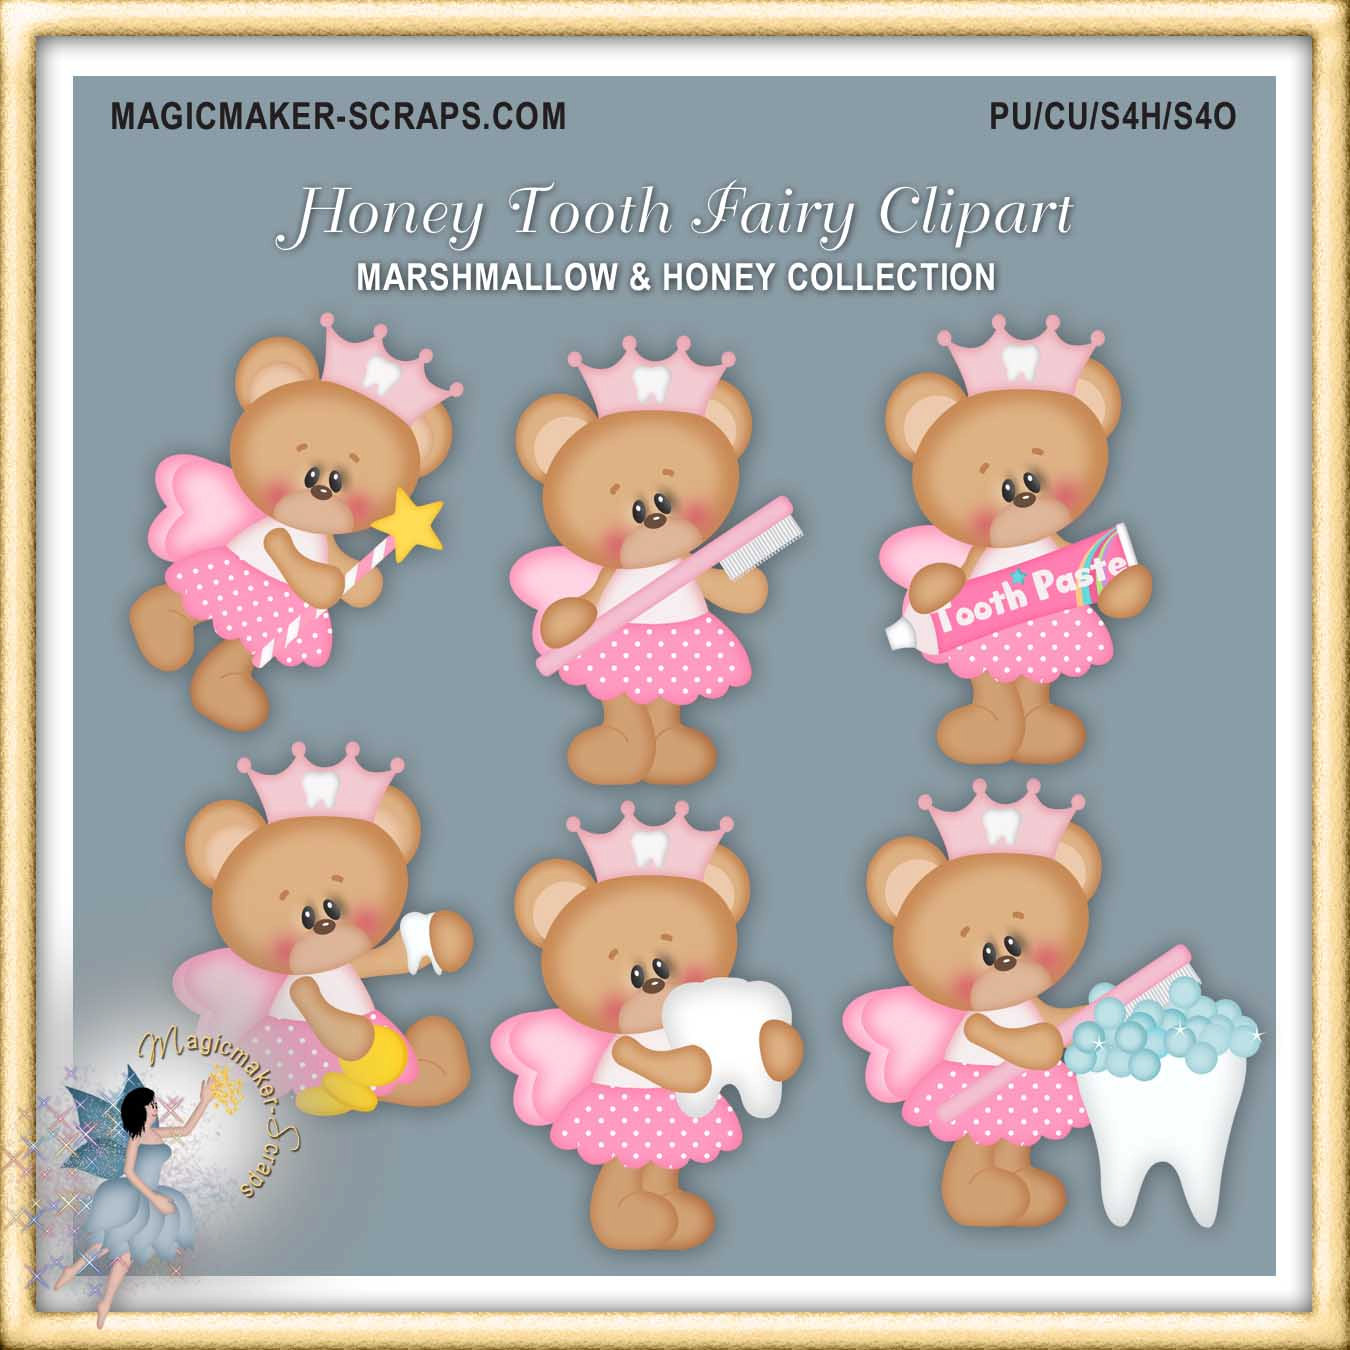 Tooth Fairy Clipart Teddy Bear By Magicmakerscraps On Etsy